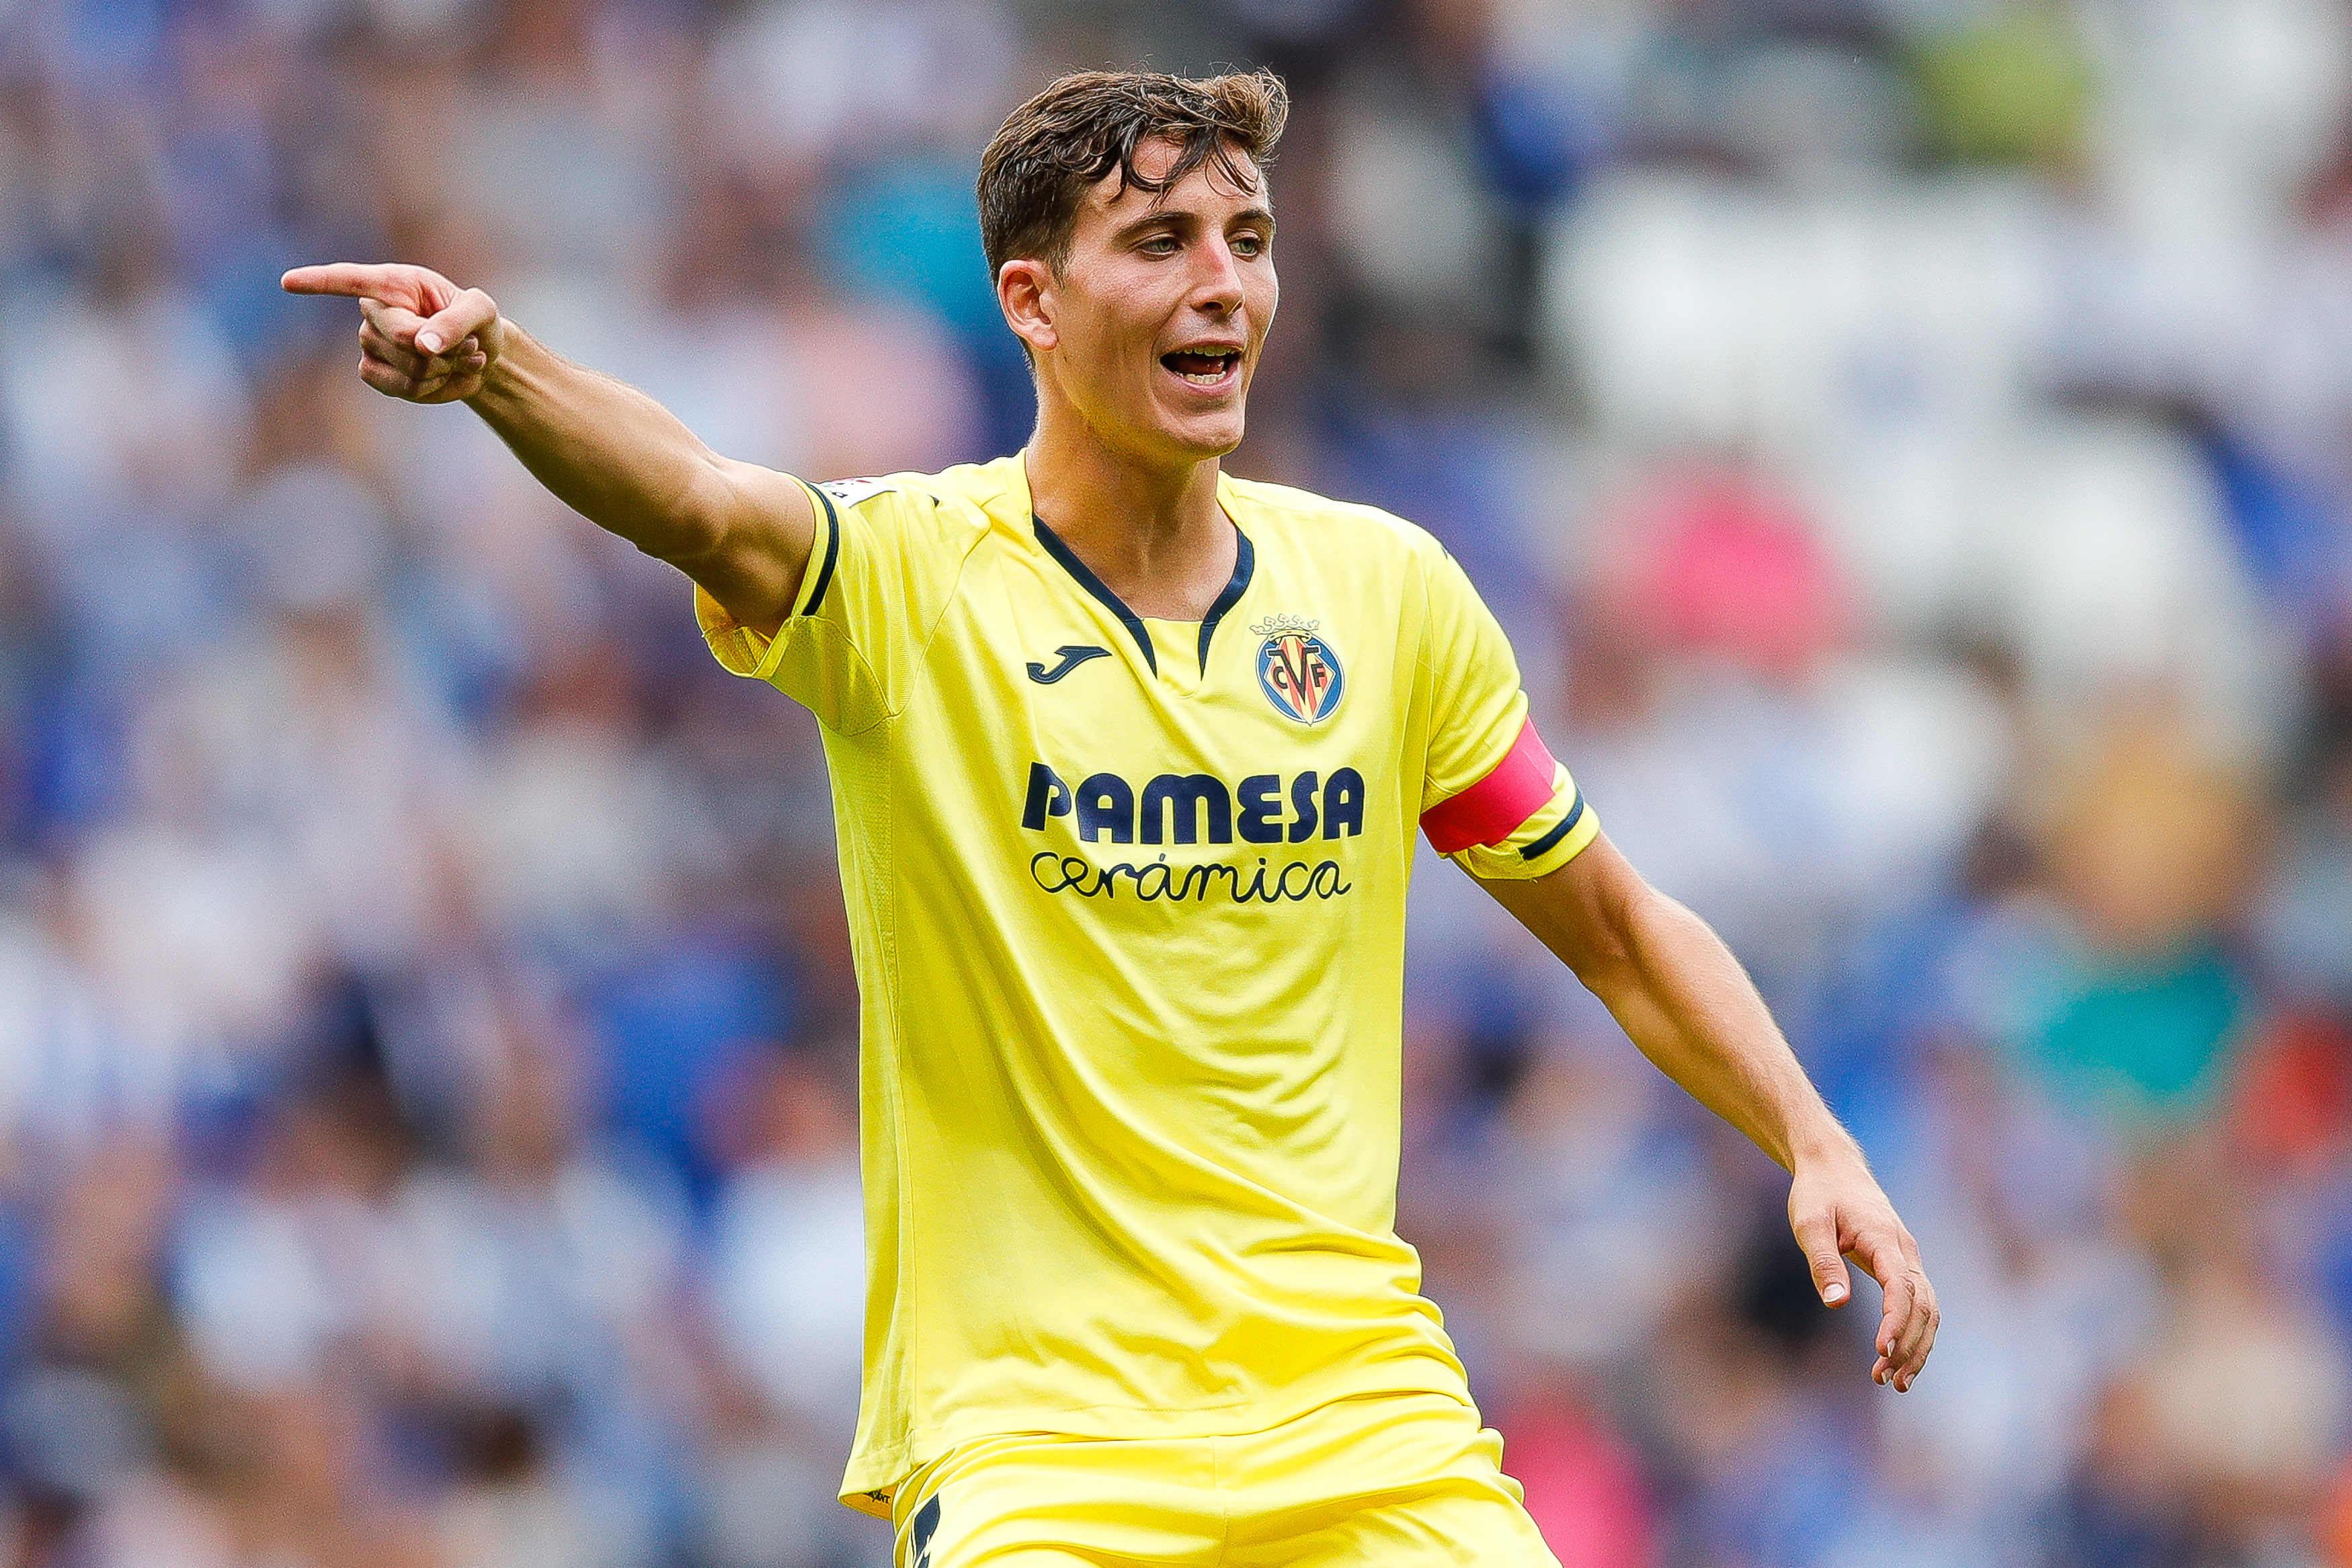 Pau Torres has been brilliant for Villarreal this season. (Photo by Eric Alonso/Getty Images)